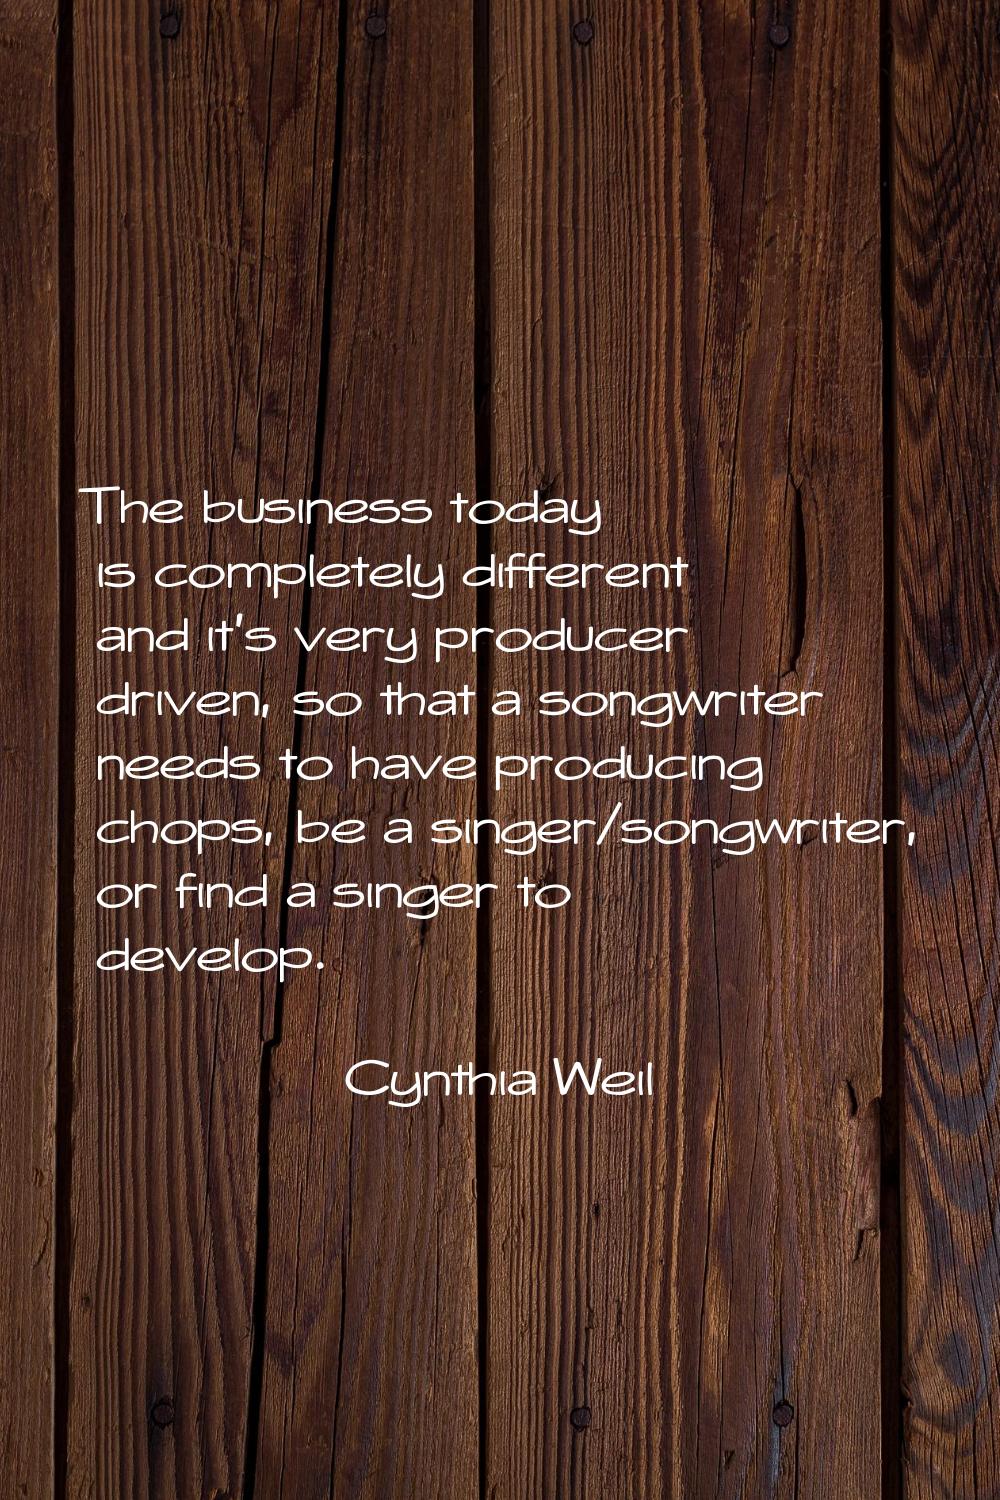 The business today is completely different and it's very producer driven, so that a songwriter need